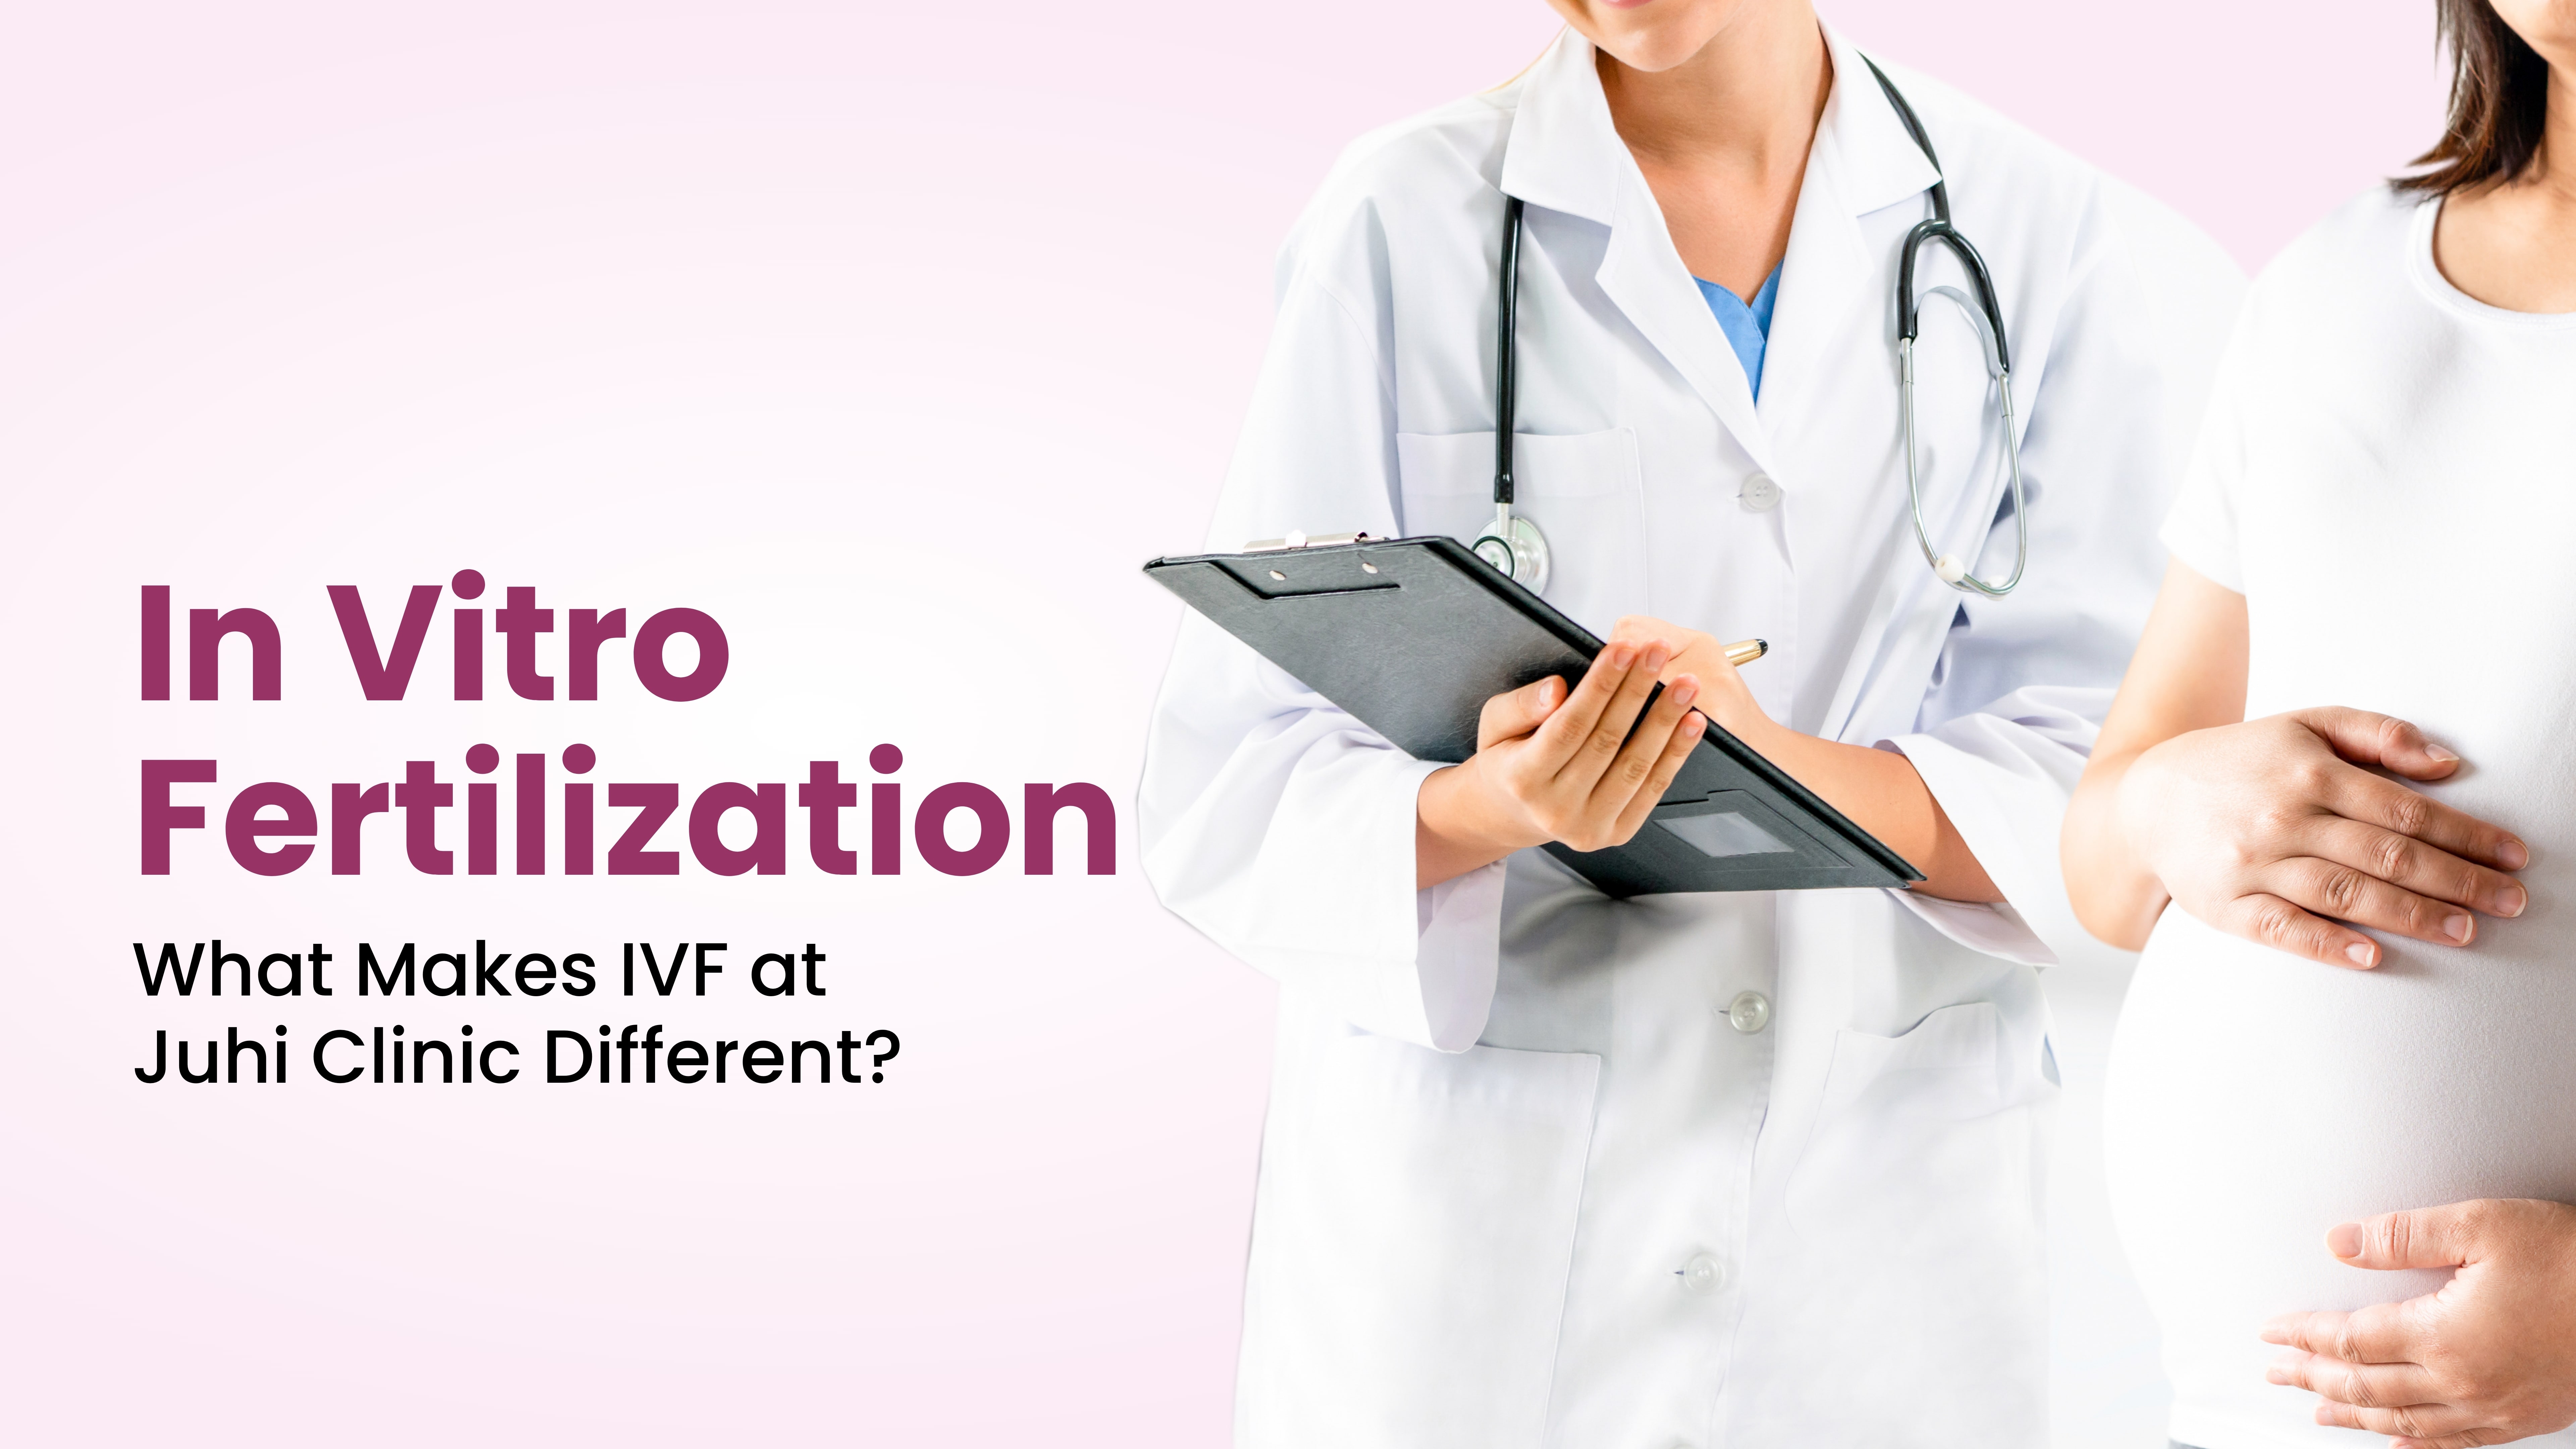 IVF Protocol for PCOS Patients